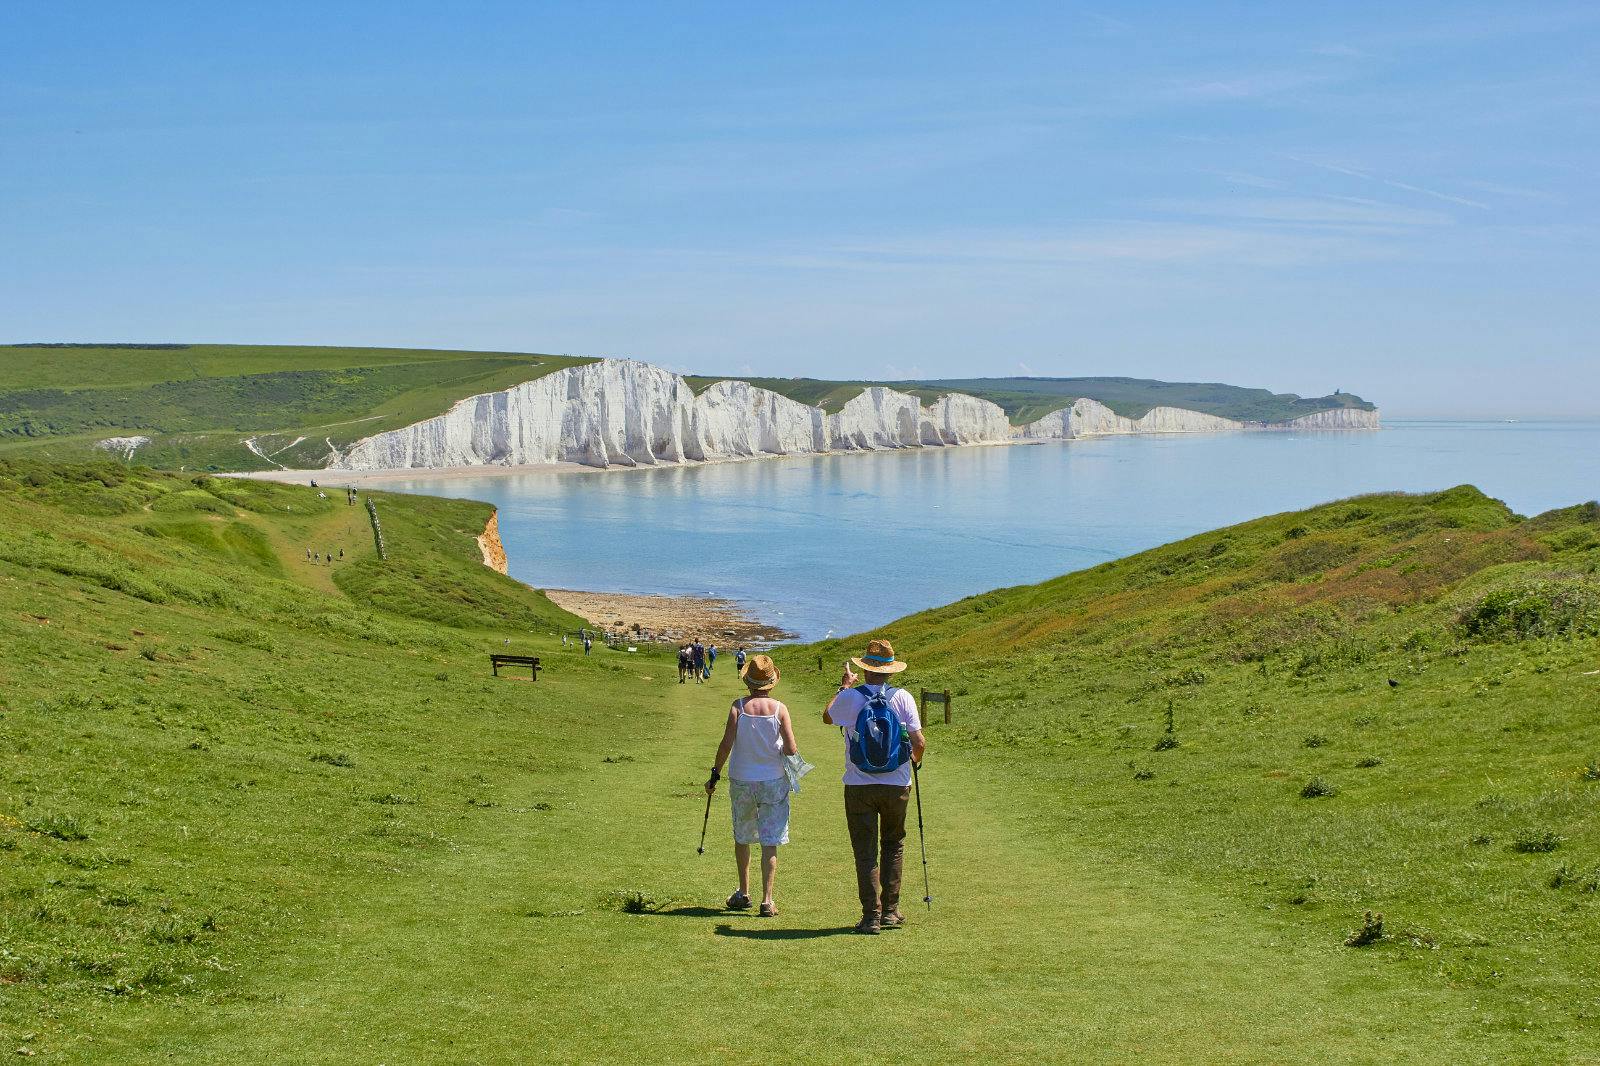 An older couple is walking down a grassy path, facing the white cliffs of the Seven Sisters in Southern England. They are both wearing straw hats. It’s a clear and sunny day.